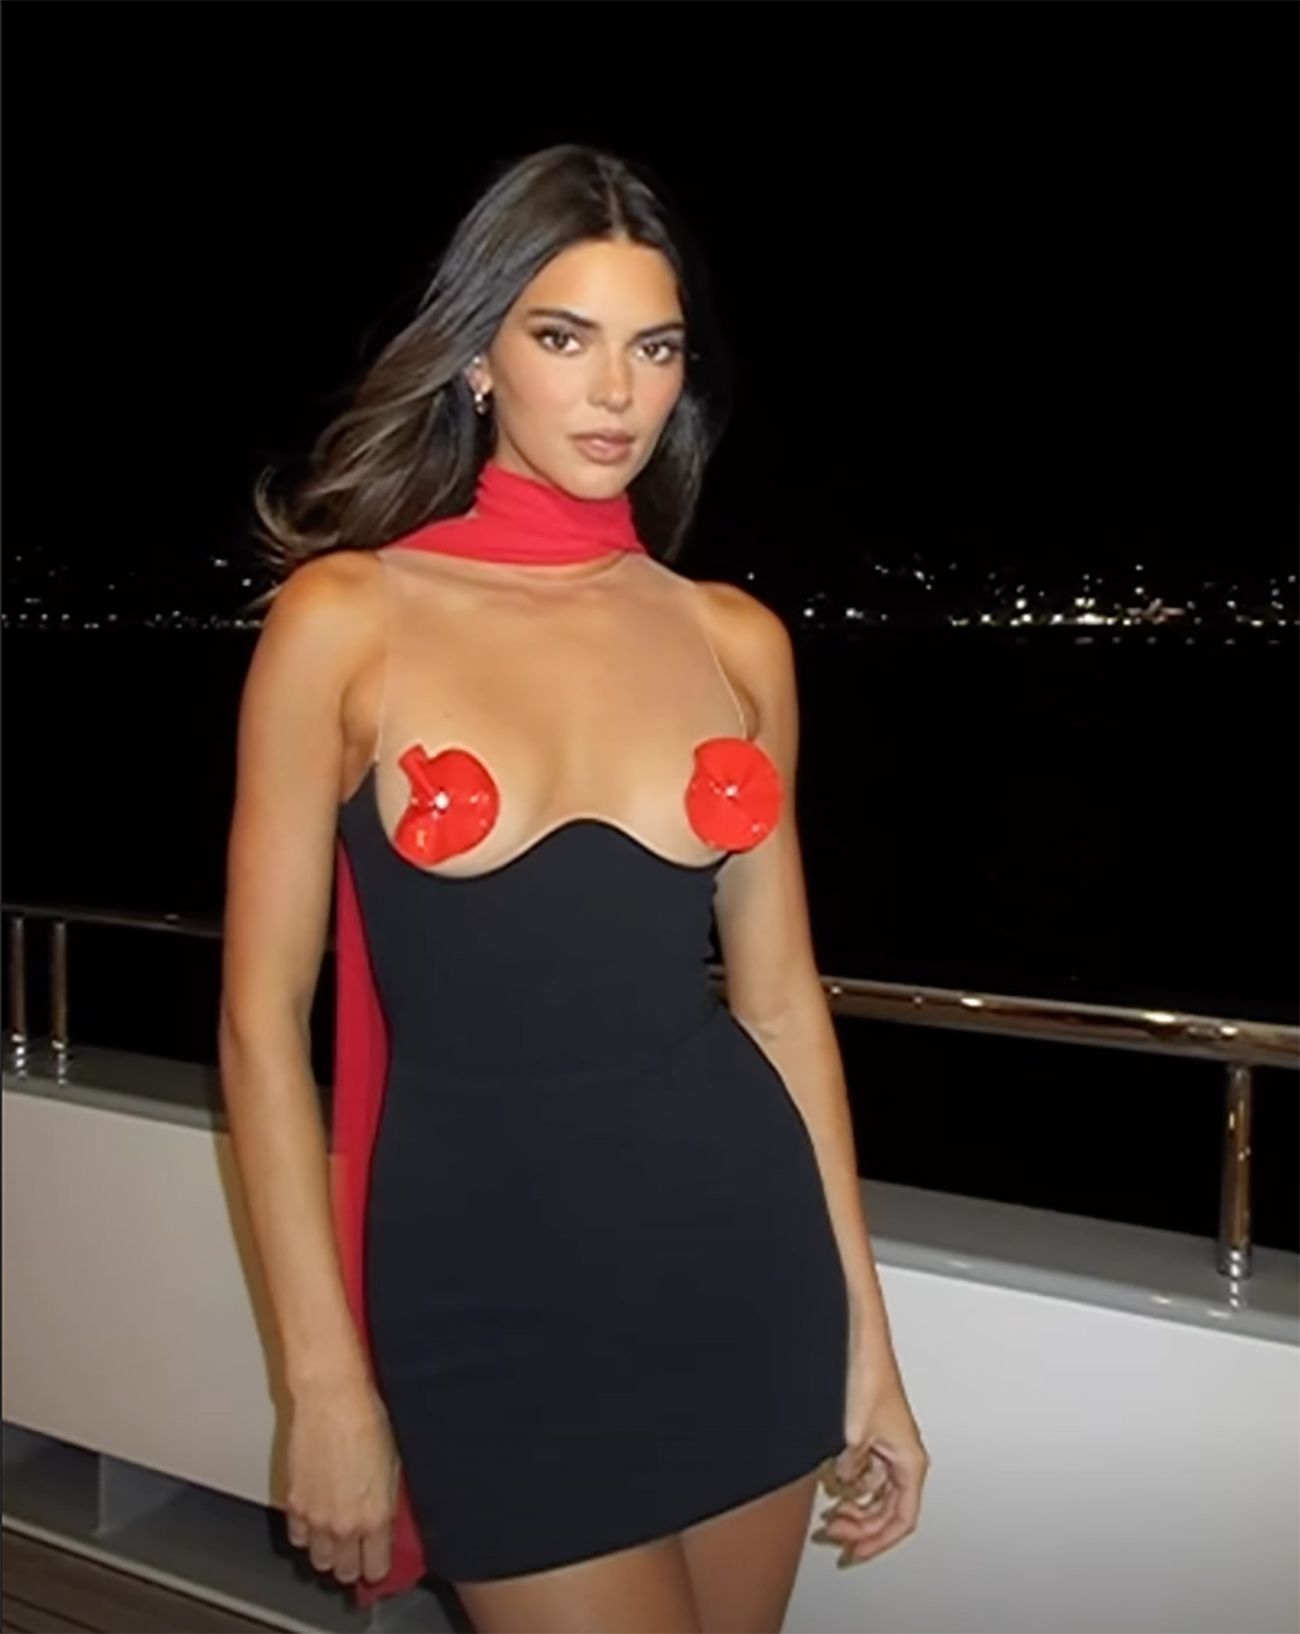 carol wilt add kendall jenner in the nude photo